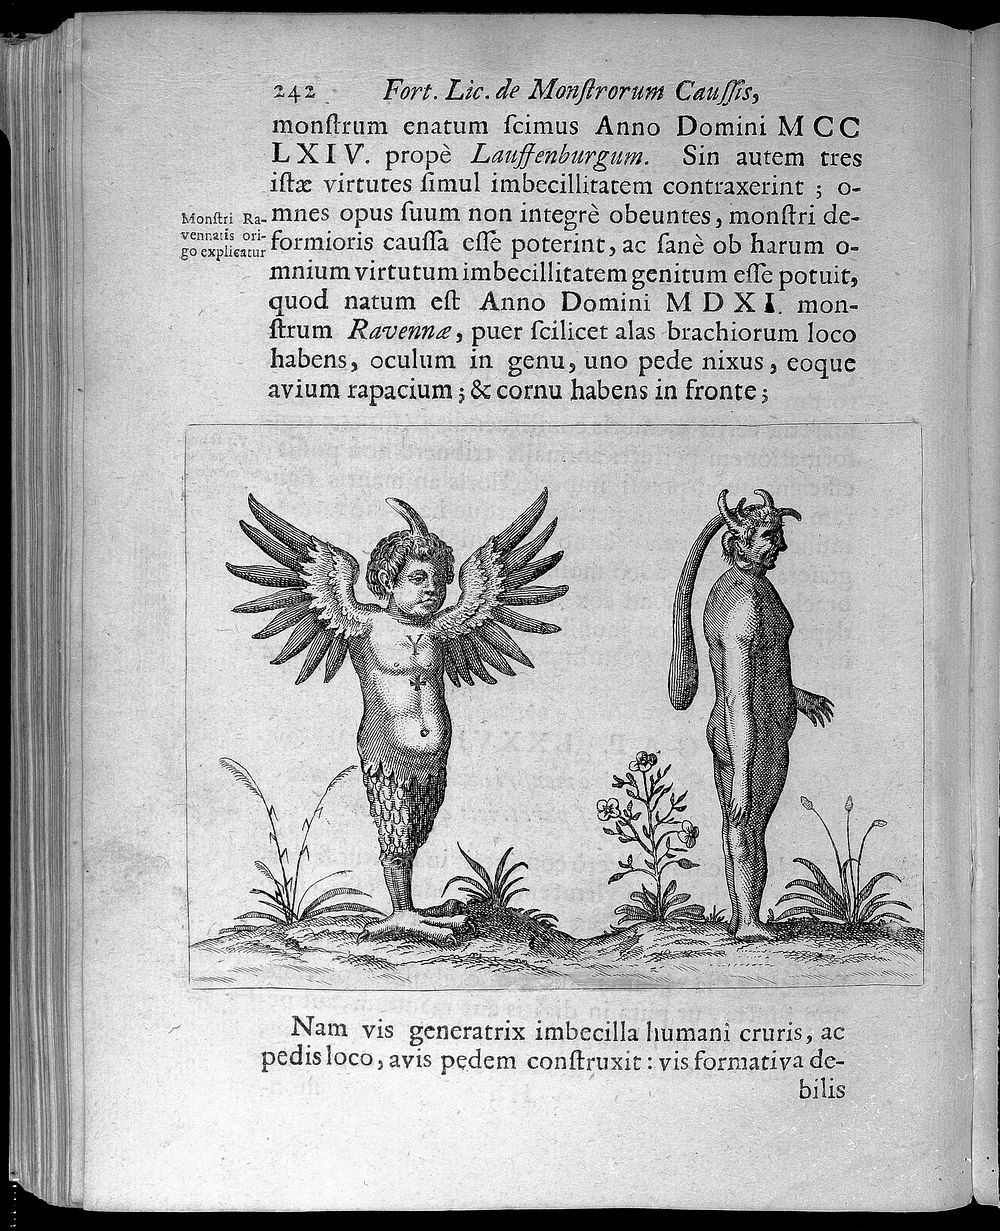 Two figures with abnormalities, one with wings as arms and feathered legs and the other one with a horned head